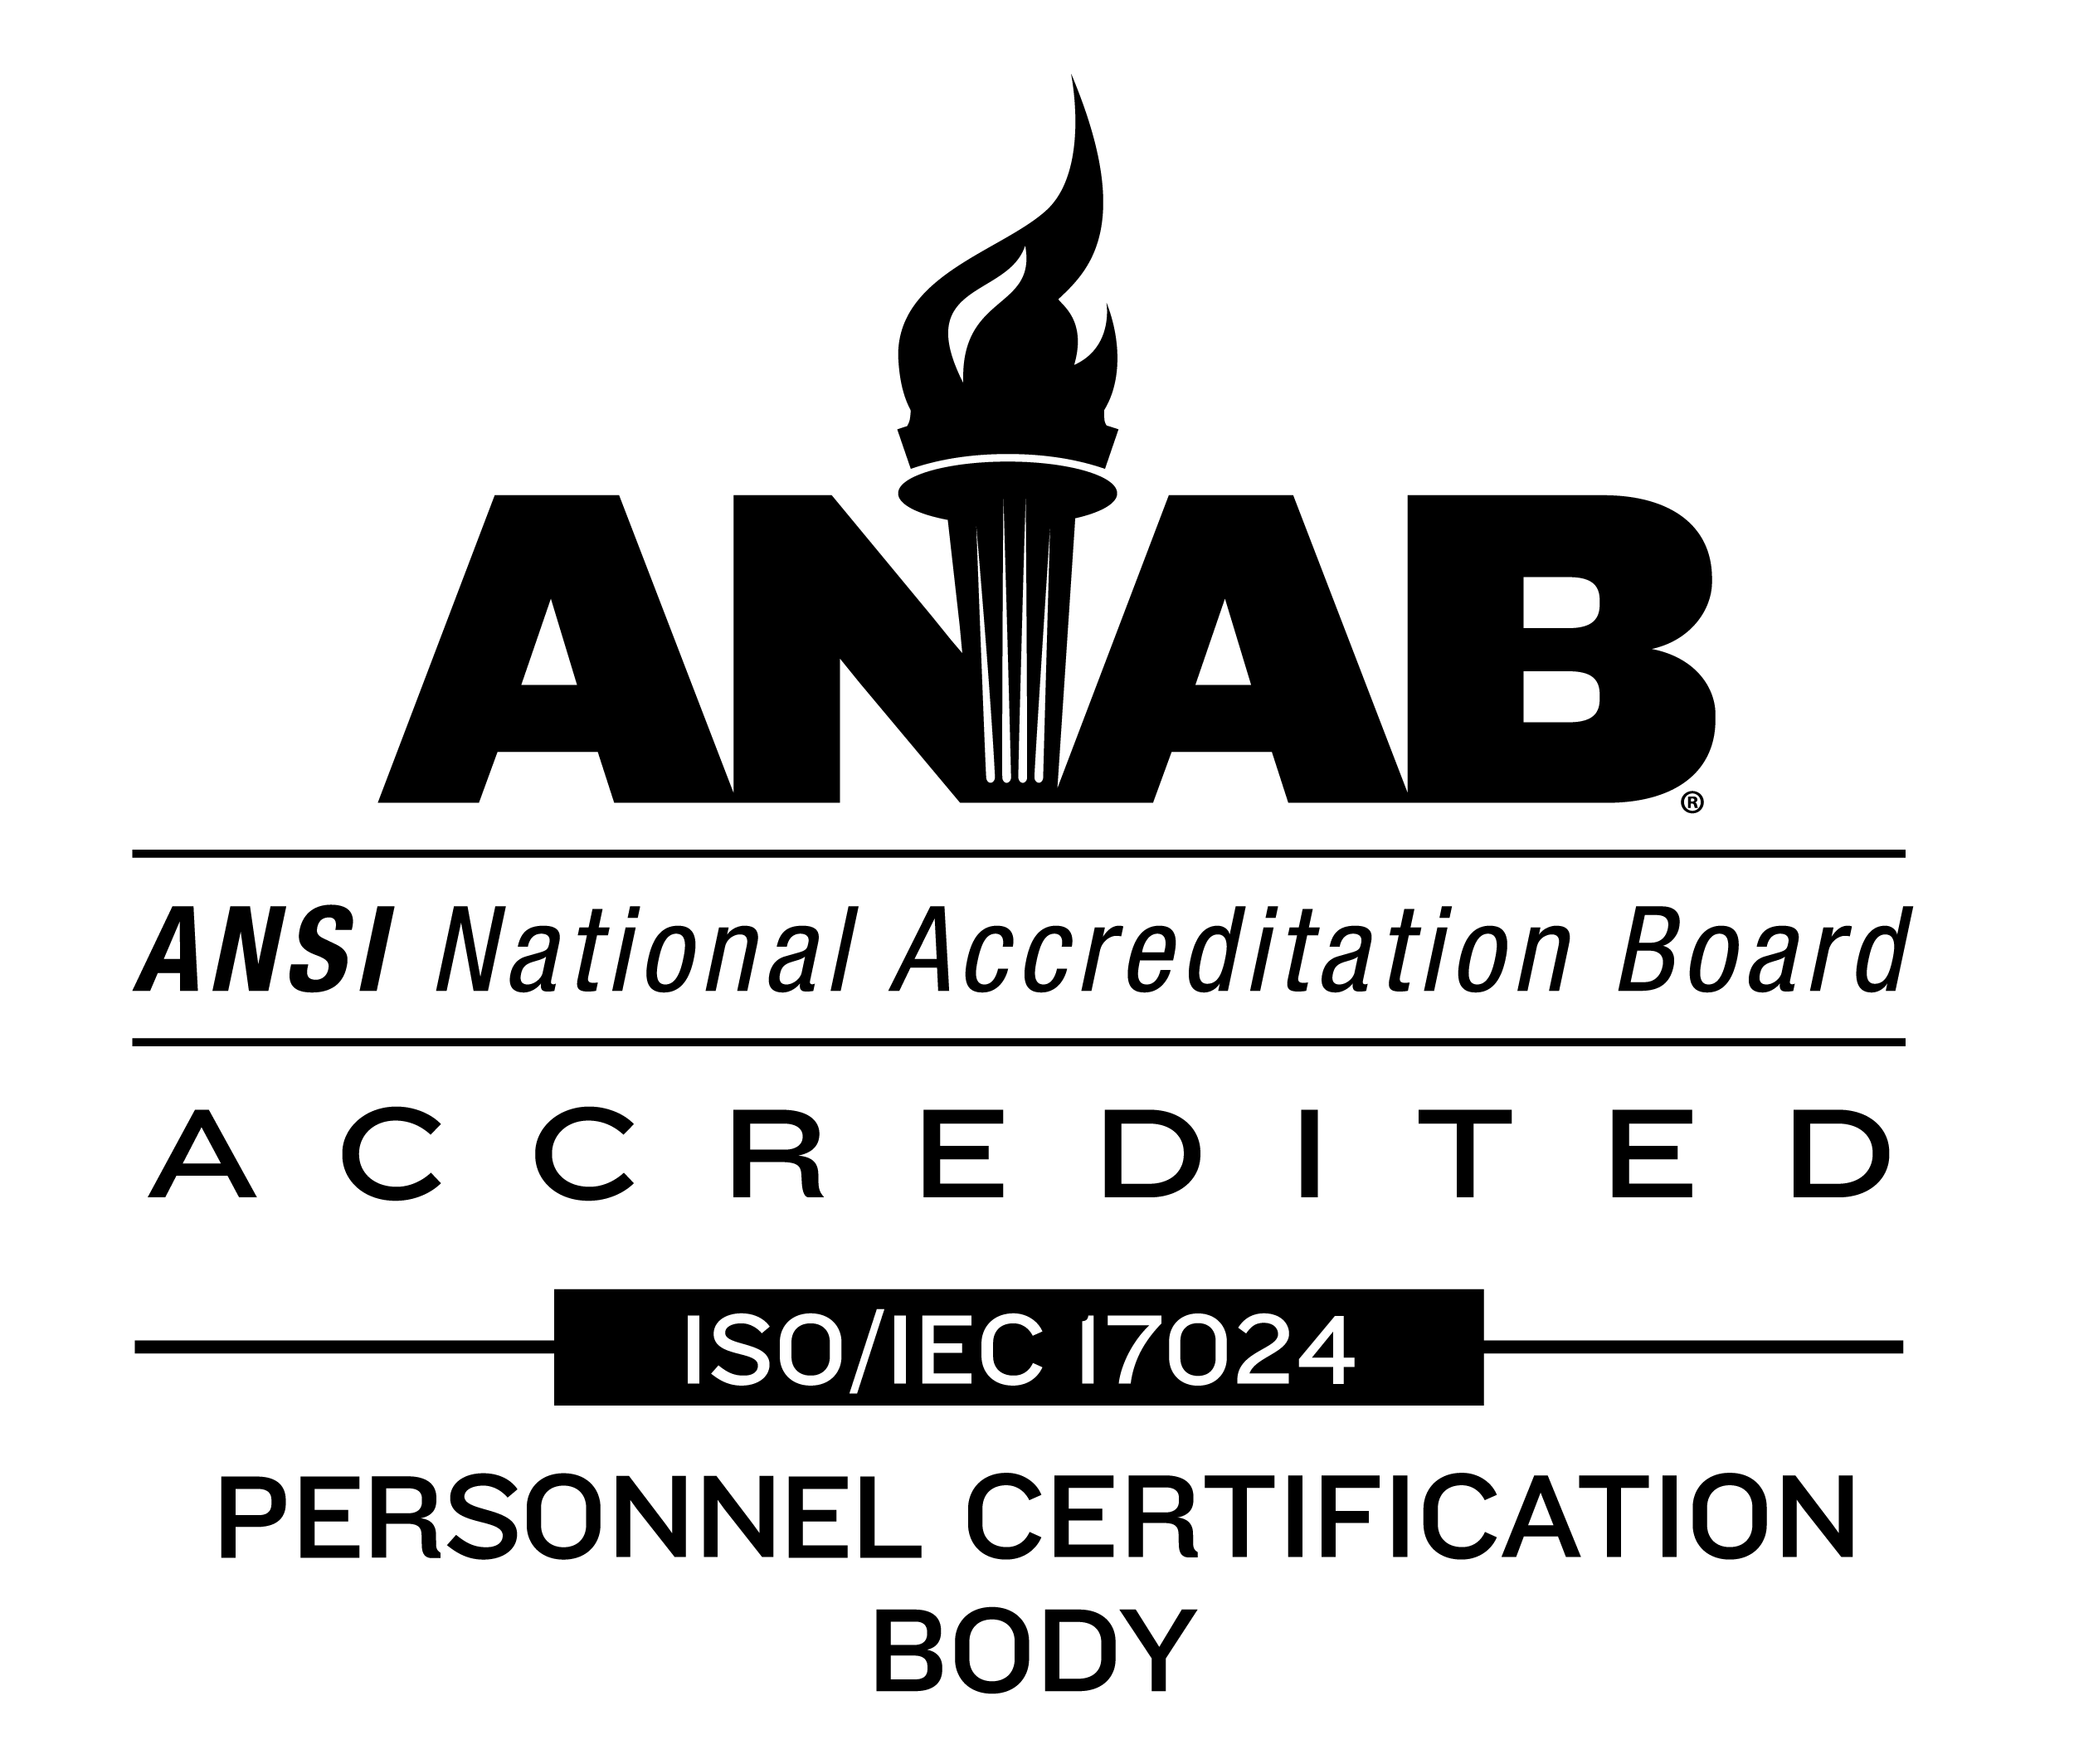 ANSI National Accreditation Board Accredited ISO/IEC 17024 Personnel Certification Body